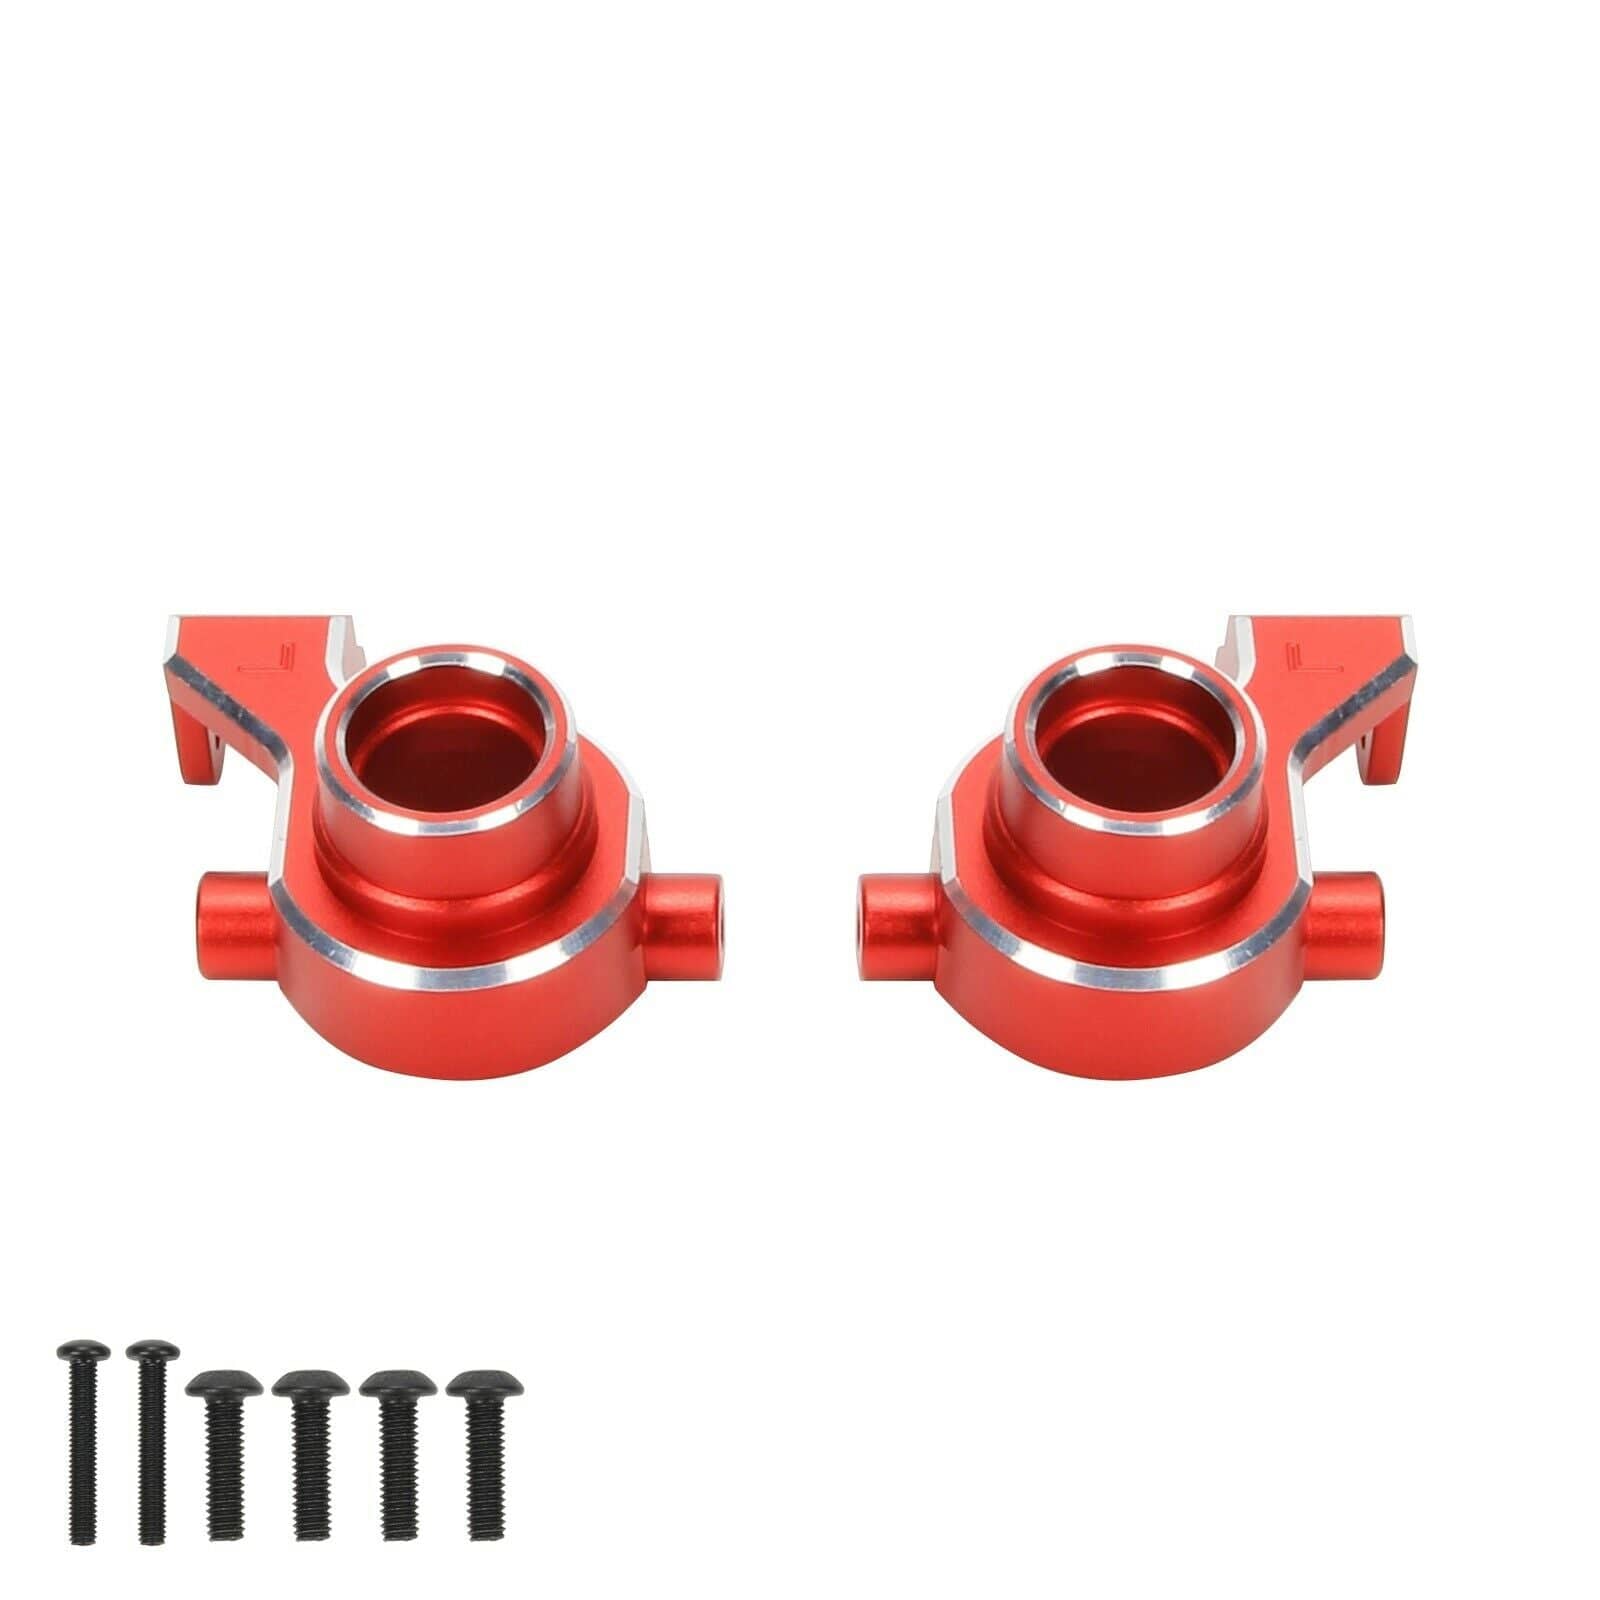 RCAWD Red Traxxas Maxx Steering blocks left & right 8937 RCAWD